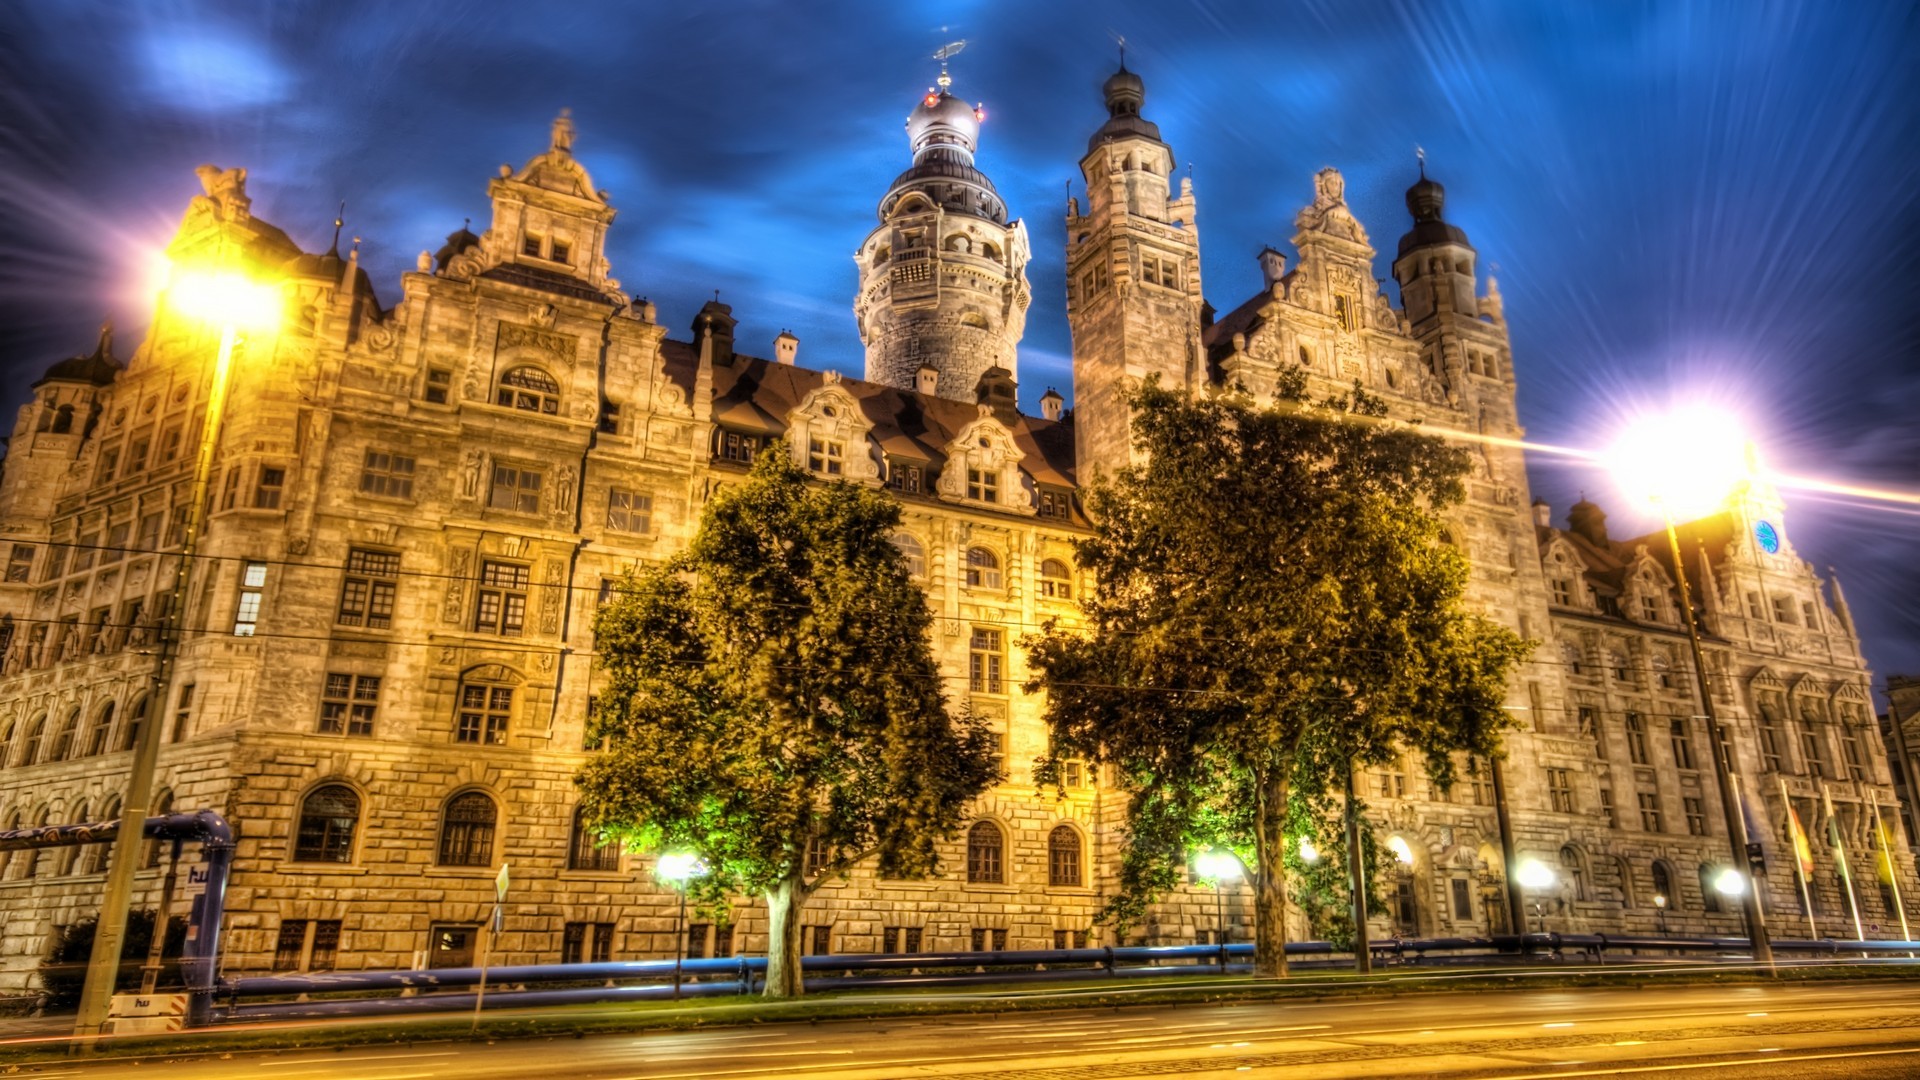 General 1920x1080 building HDR Leipzig city Germany architecture